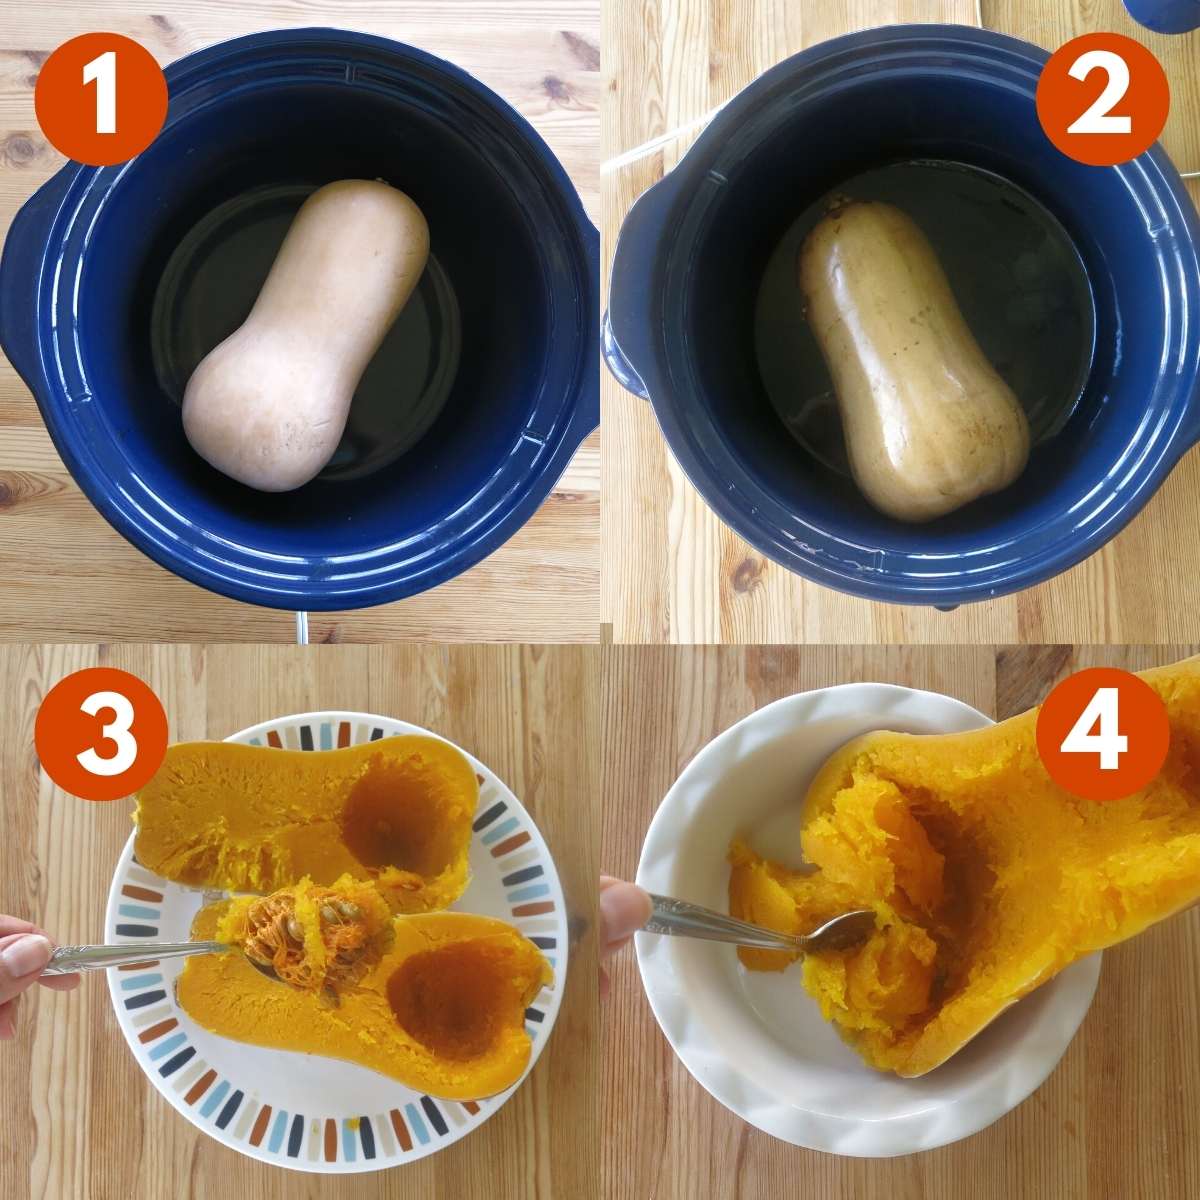 Collage of steps to cook butternut squash whole in slow cooker. 1) Uncooked squash in slow cooker. 2) Cooked squash in slow cooker. 3) Cooked squash cooked in half with seeds being removed. 4) Flesh being scraped from skin.